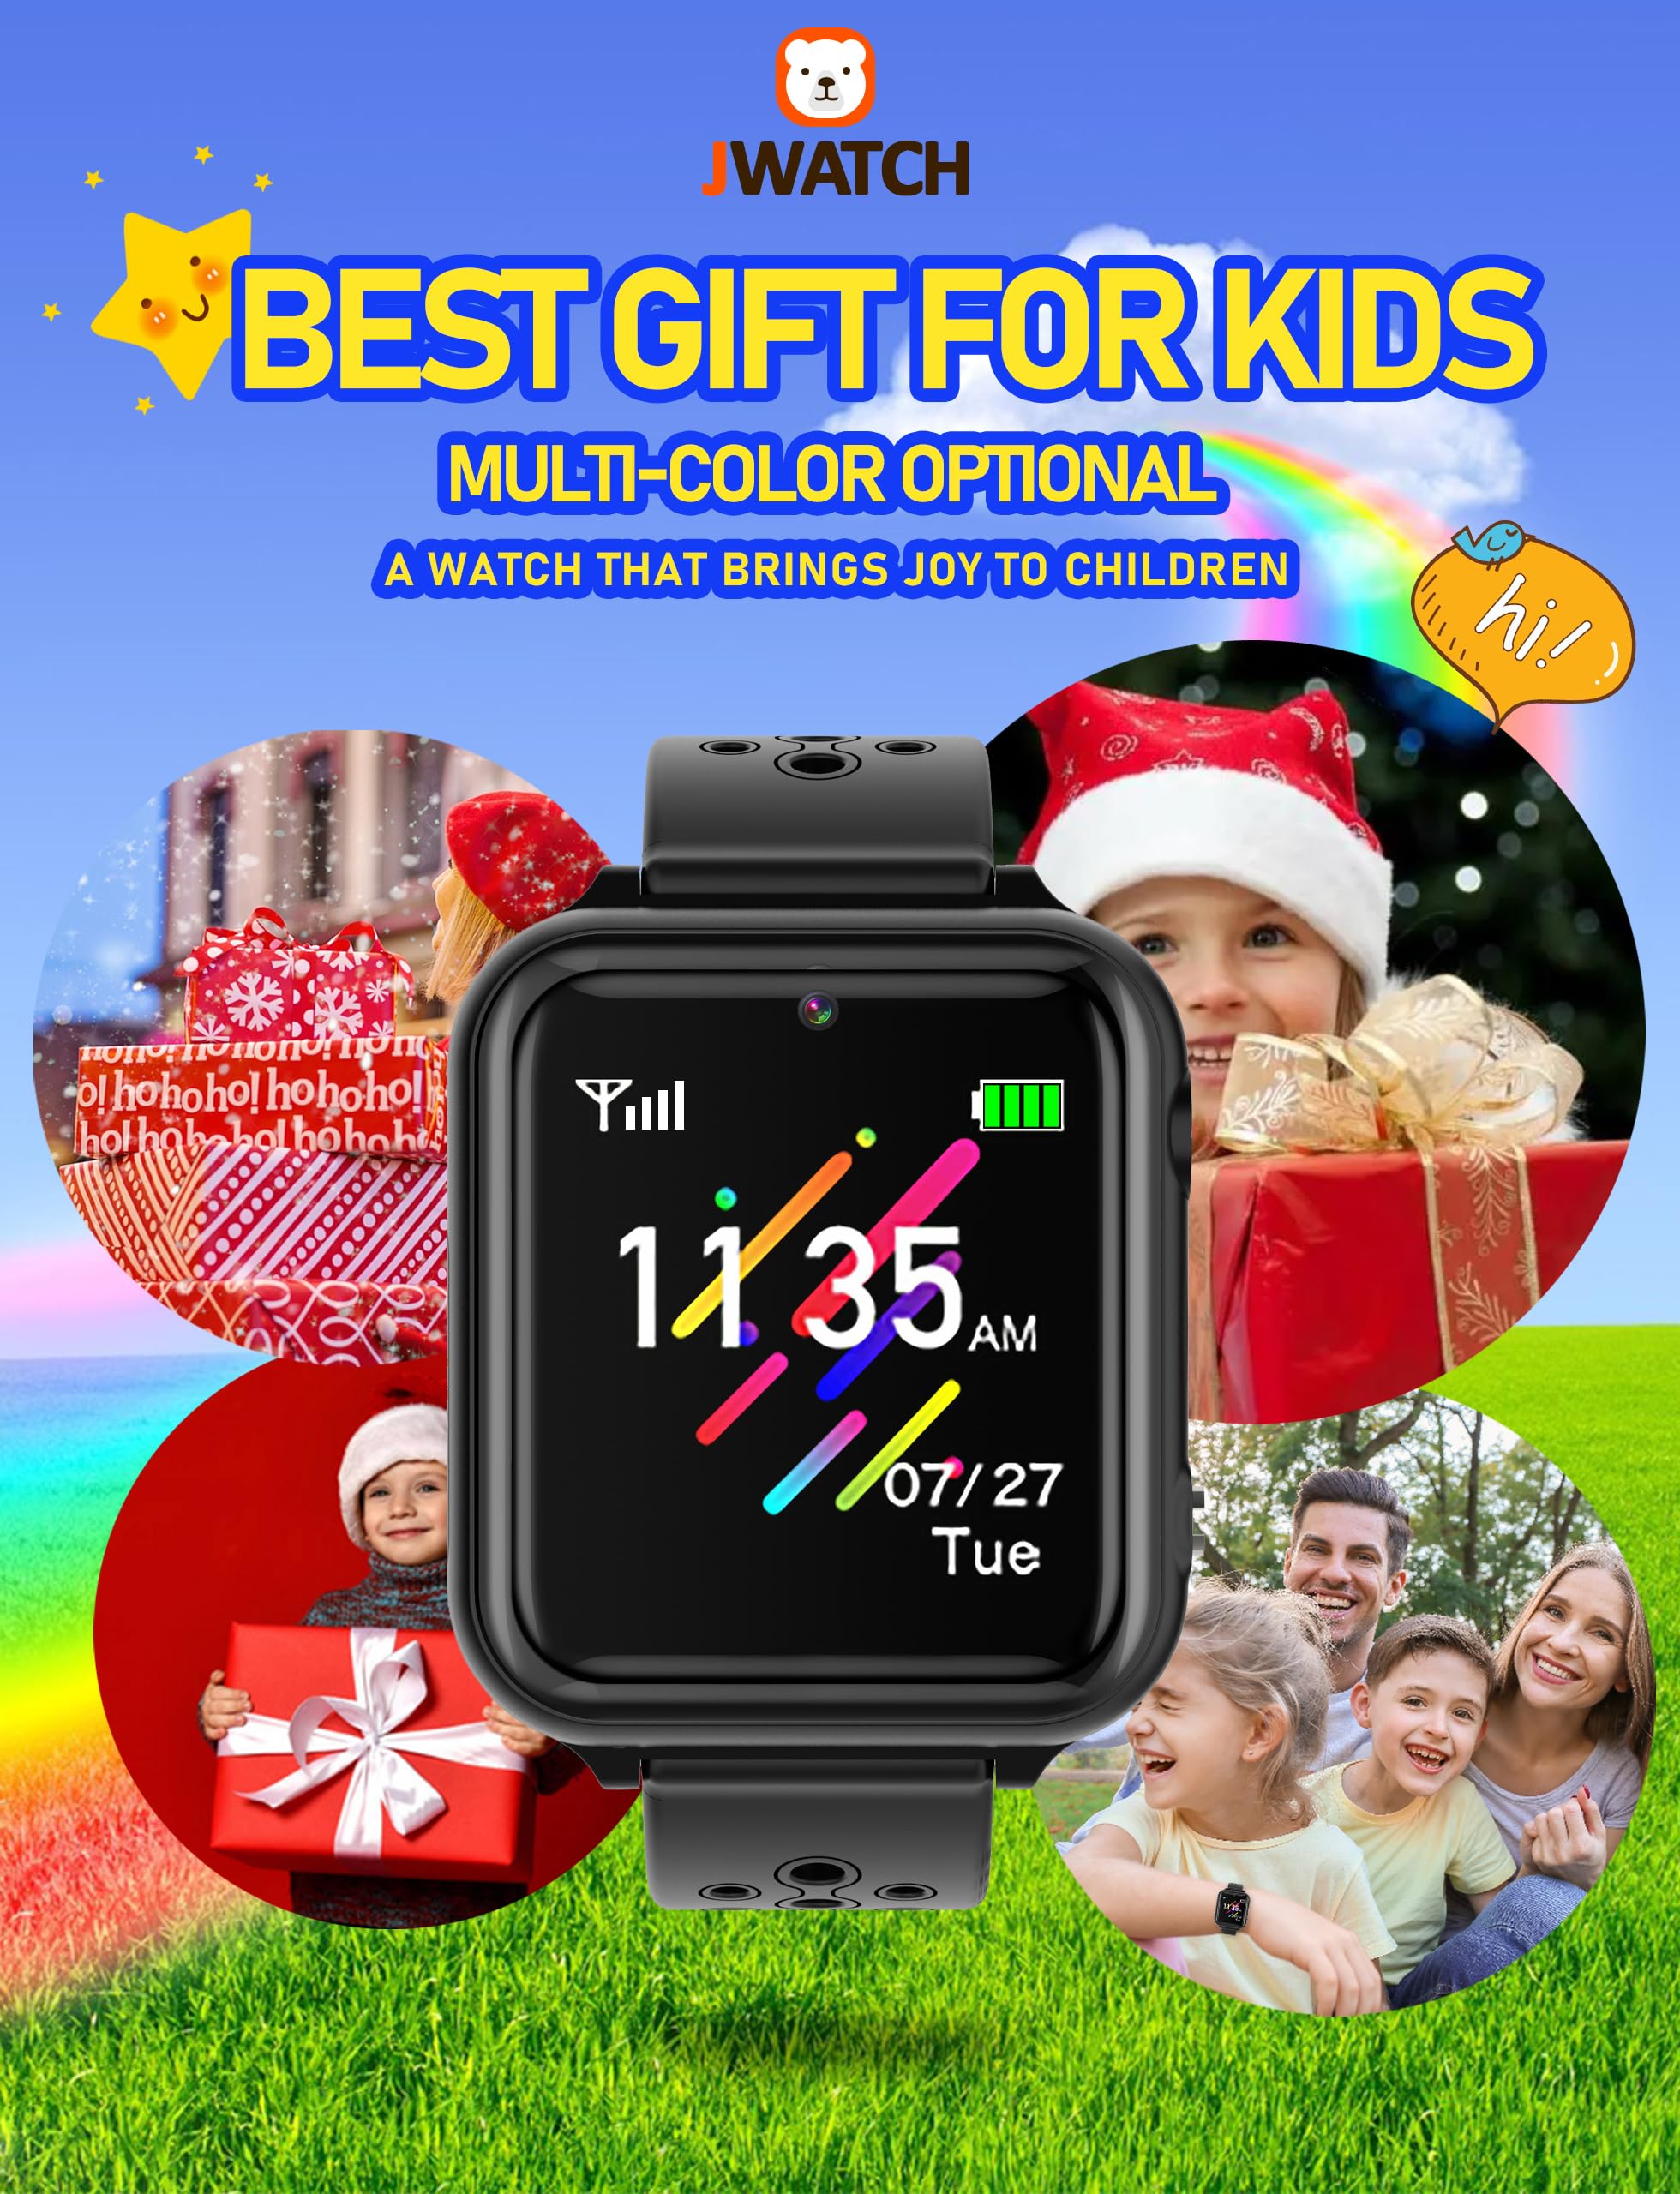 Jwatch Kids Smart Watch Phone Sos with 10 storys 16 Puzzle Games Stopwatch Alarm Clock Kids Watches Toys for 6 7 8 9 10 11 12 Boys Girls Gift for Birthday Christmas (Black)…